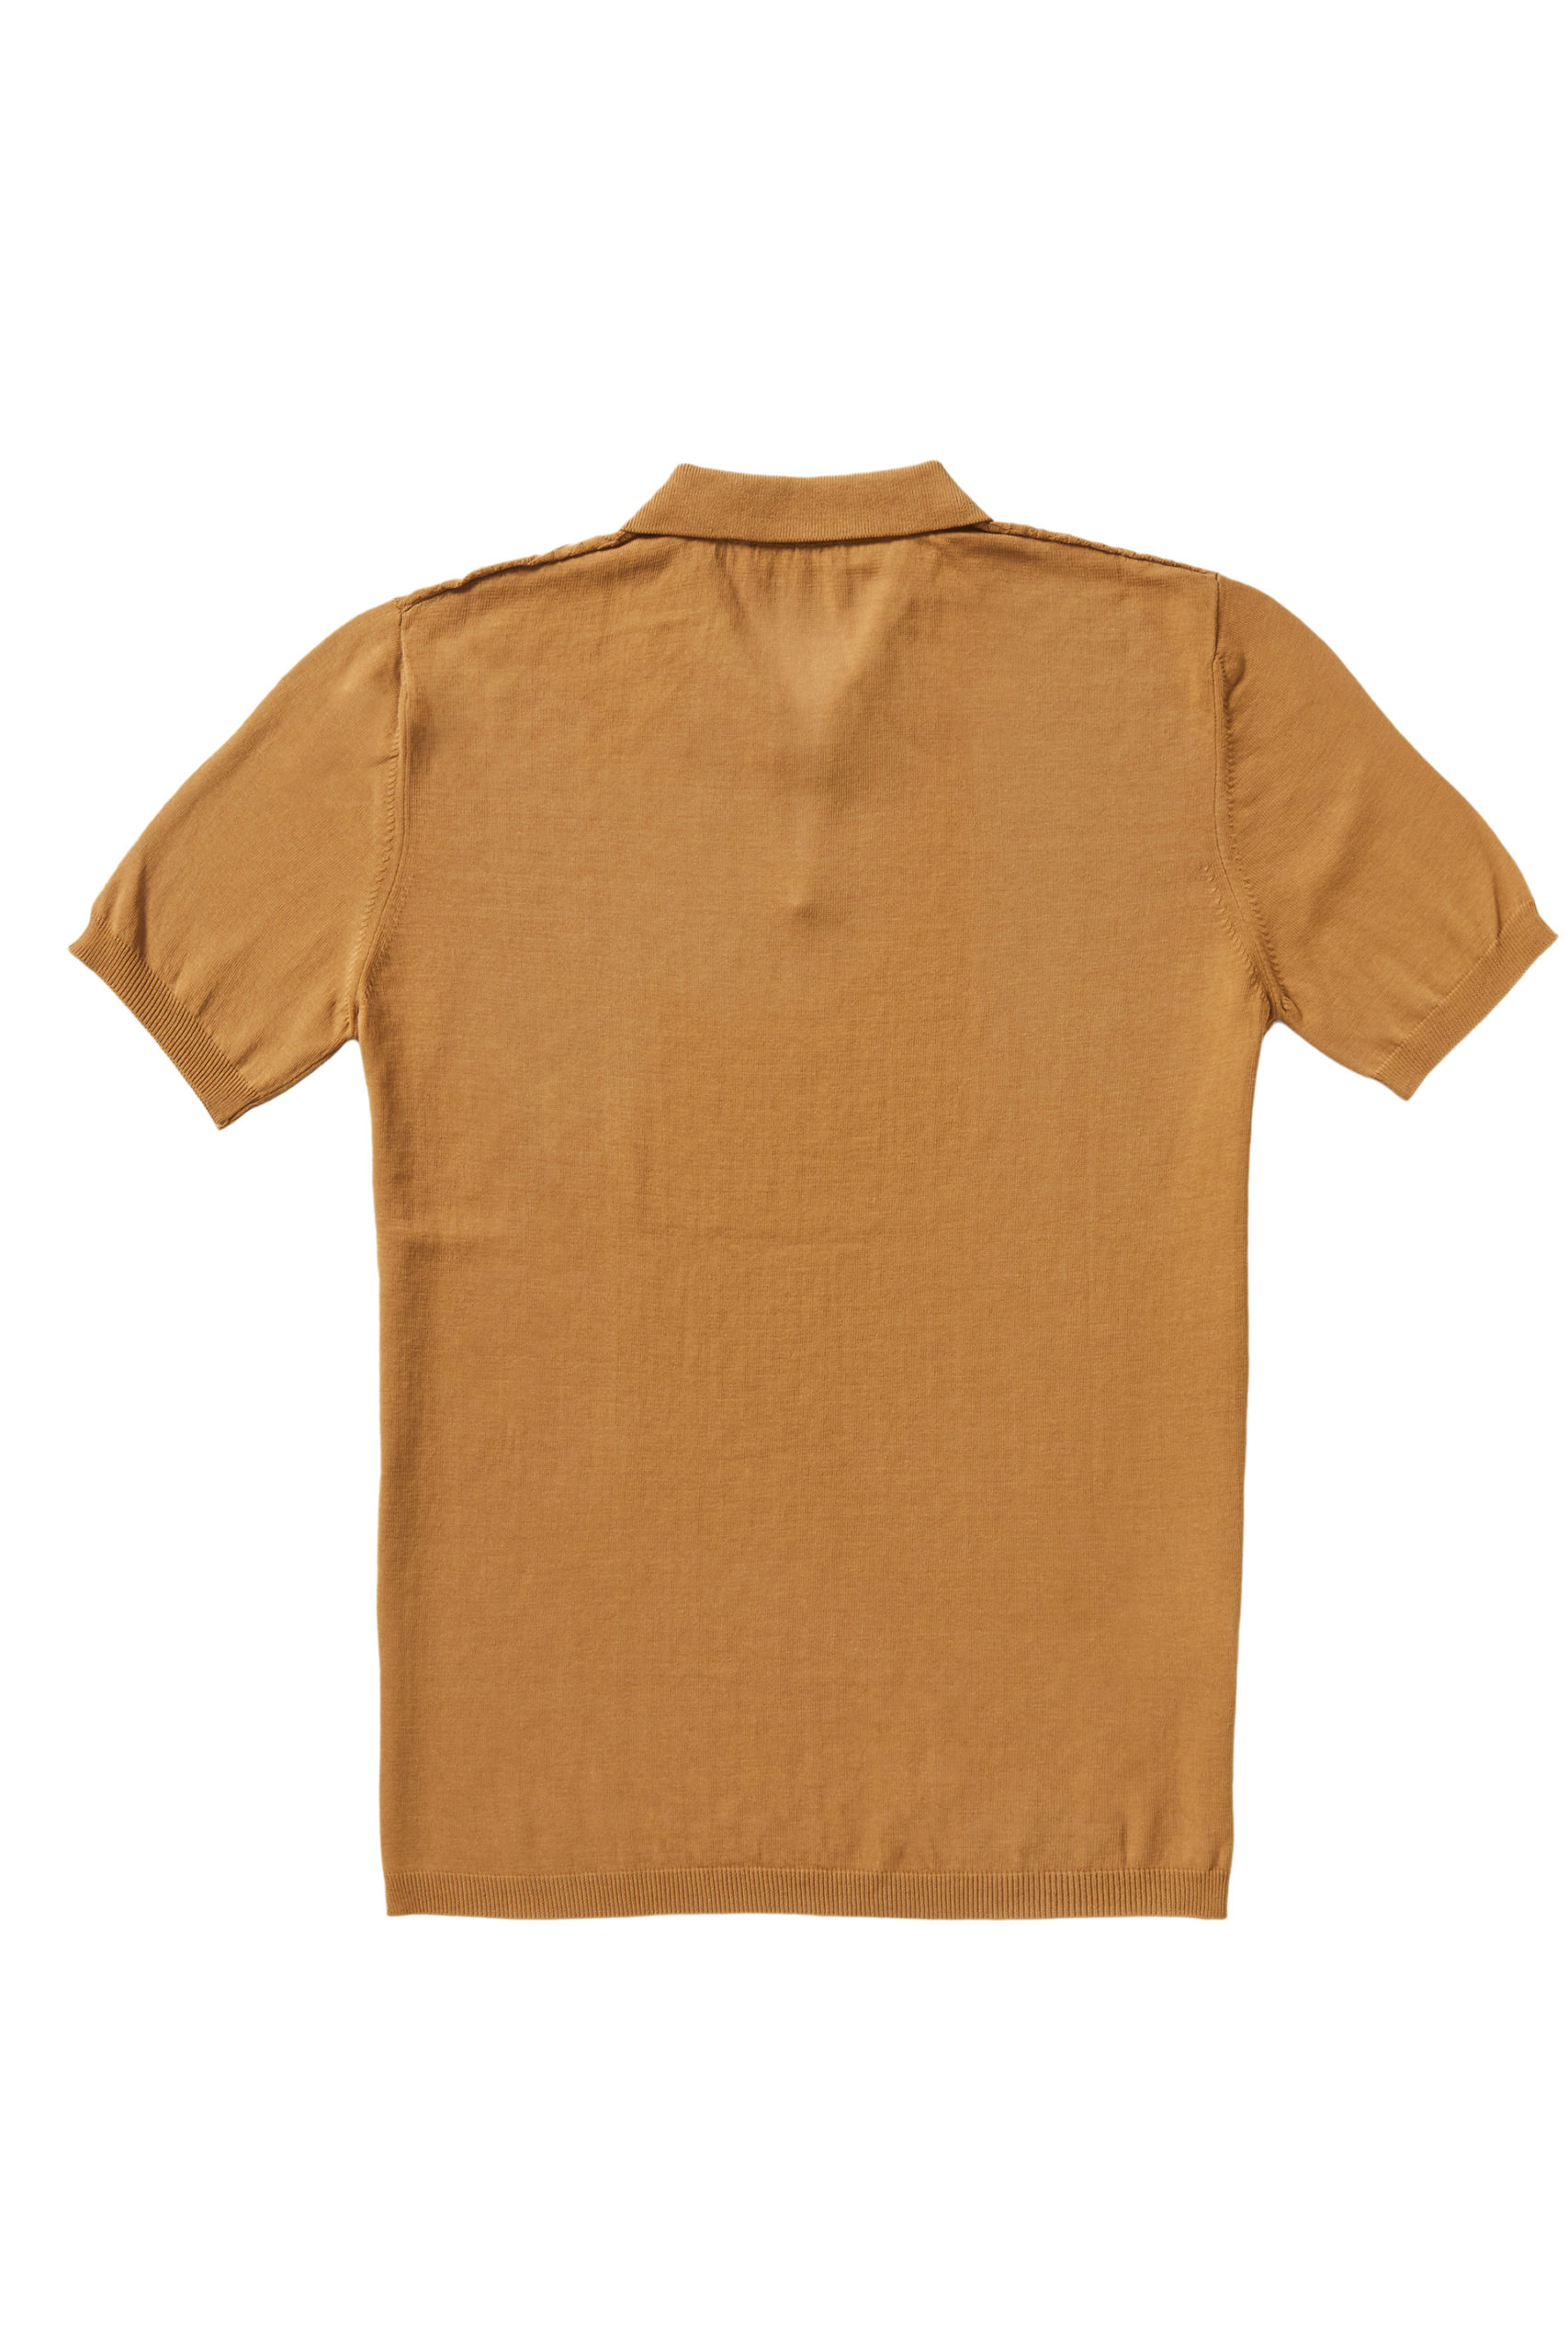 P.P.P. Light Brown Vintage Pattern Knitted Cotton Polo Shirt - Barbanera